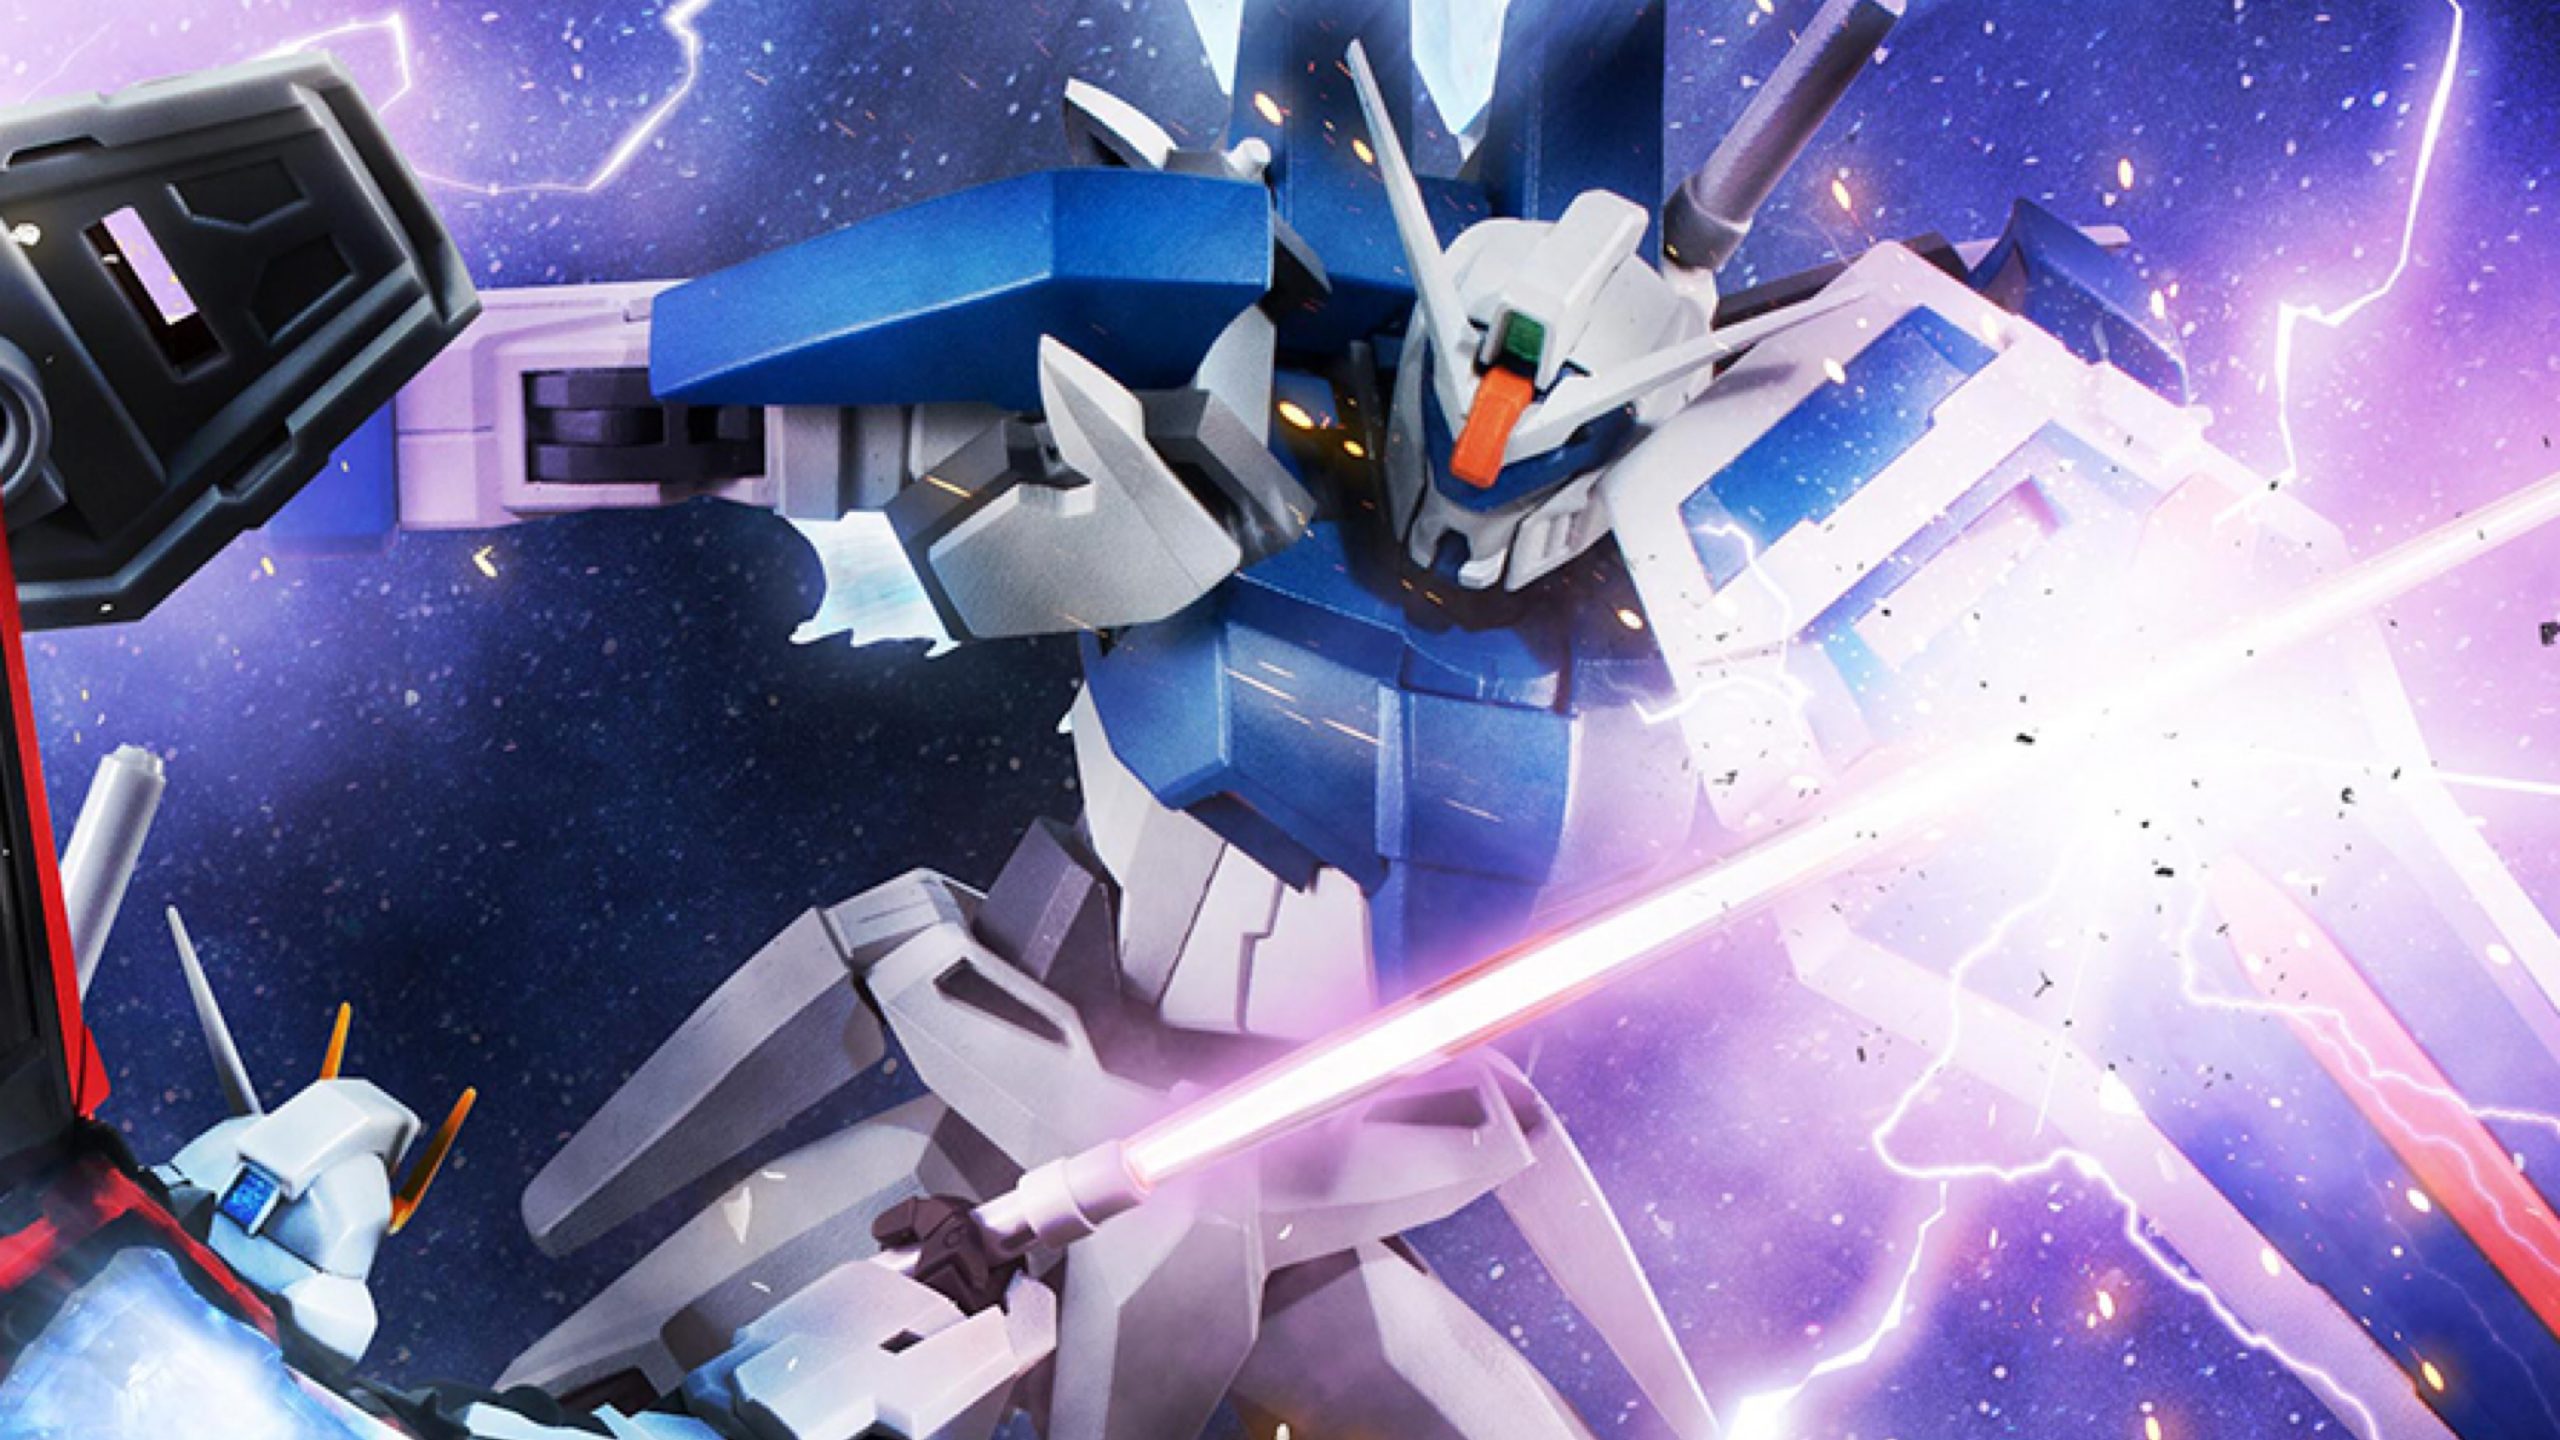 Mobile Suit Gundam Seed Freedom Sequel Anime Film Unveils 2nd Trailer and  Cast - QooApp News